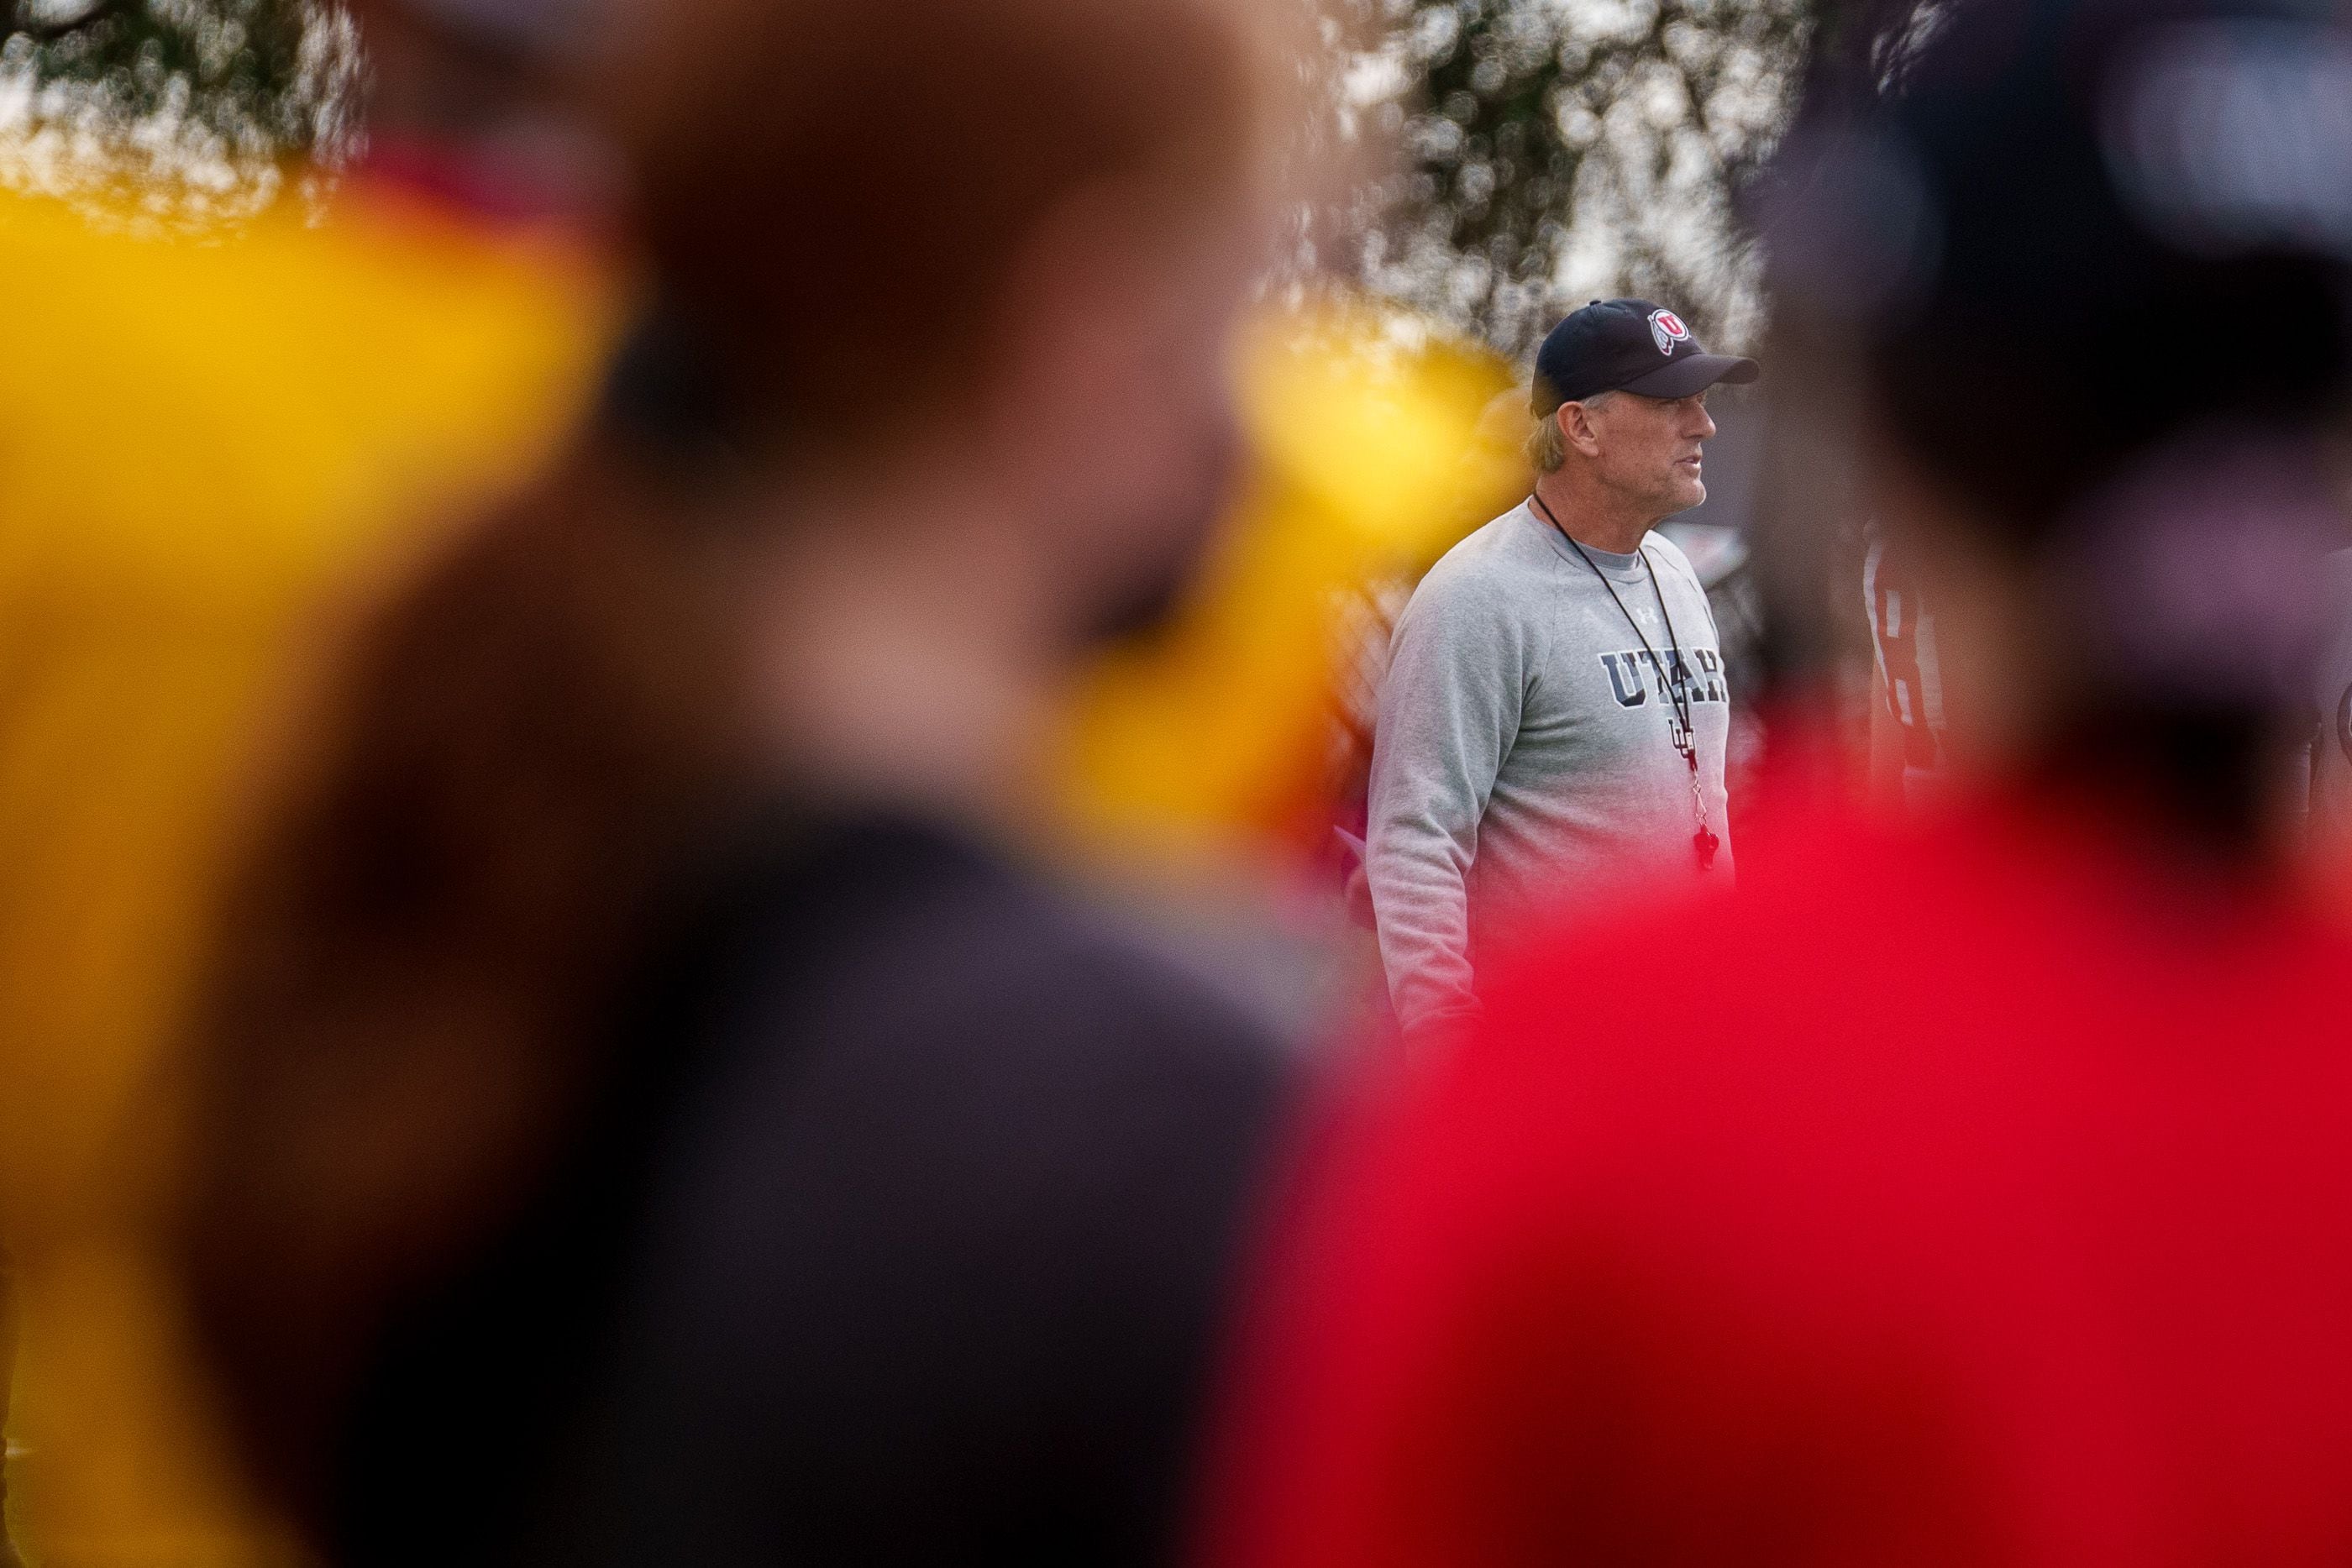 (Trent Nelson | The Salt Lake Tribune) Utah football coach Kyle Whittingham as the University of Utah football team practices for the Rose Bowl at Dignity Health Sports Park in Carson, Calif., on Tuesday, Dec. 28, 2021.